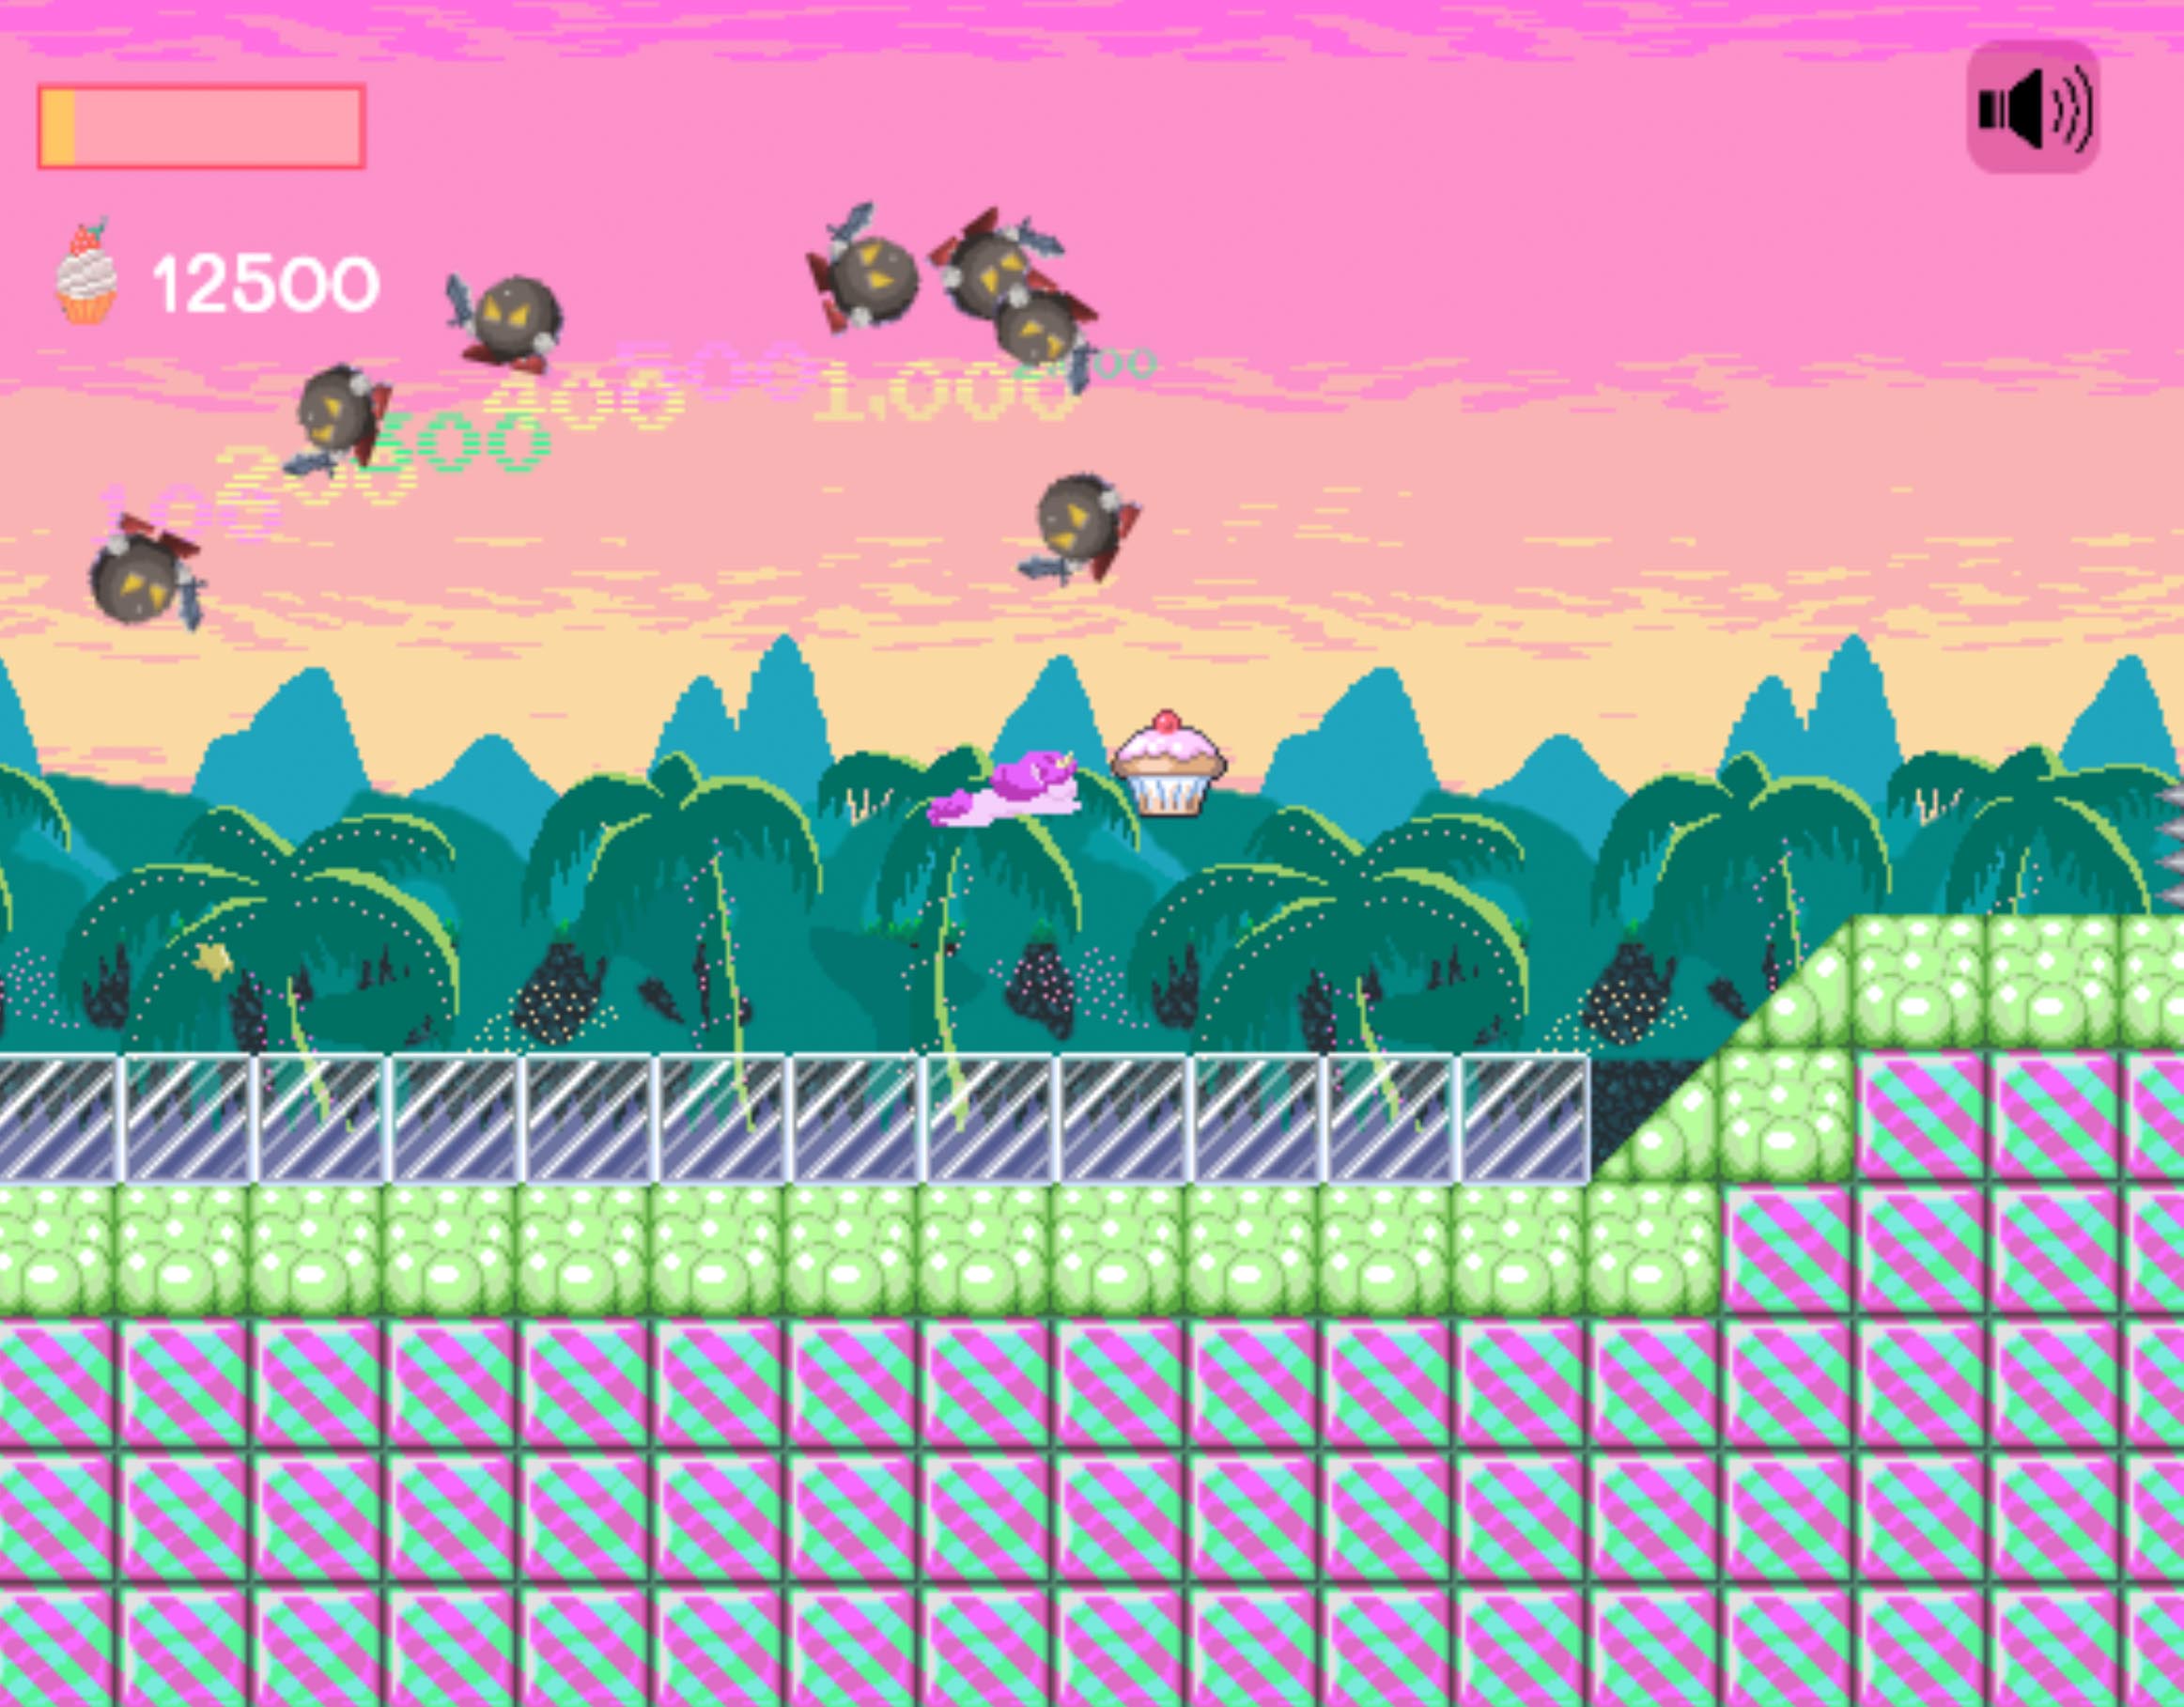 This is a screenshot from Idiom Unicorn. The player is bursting through a bunch of enemies and about to collect a cupcake.